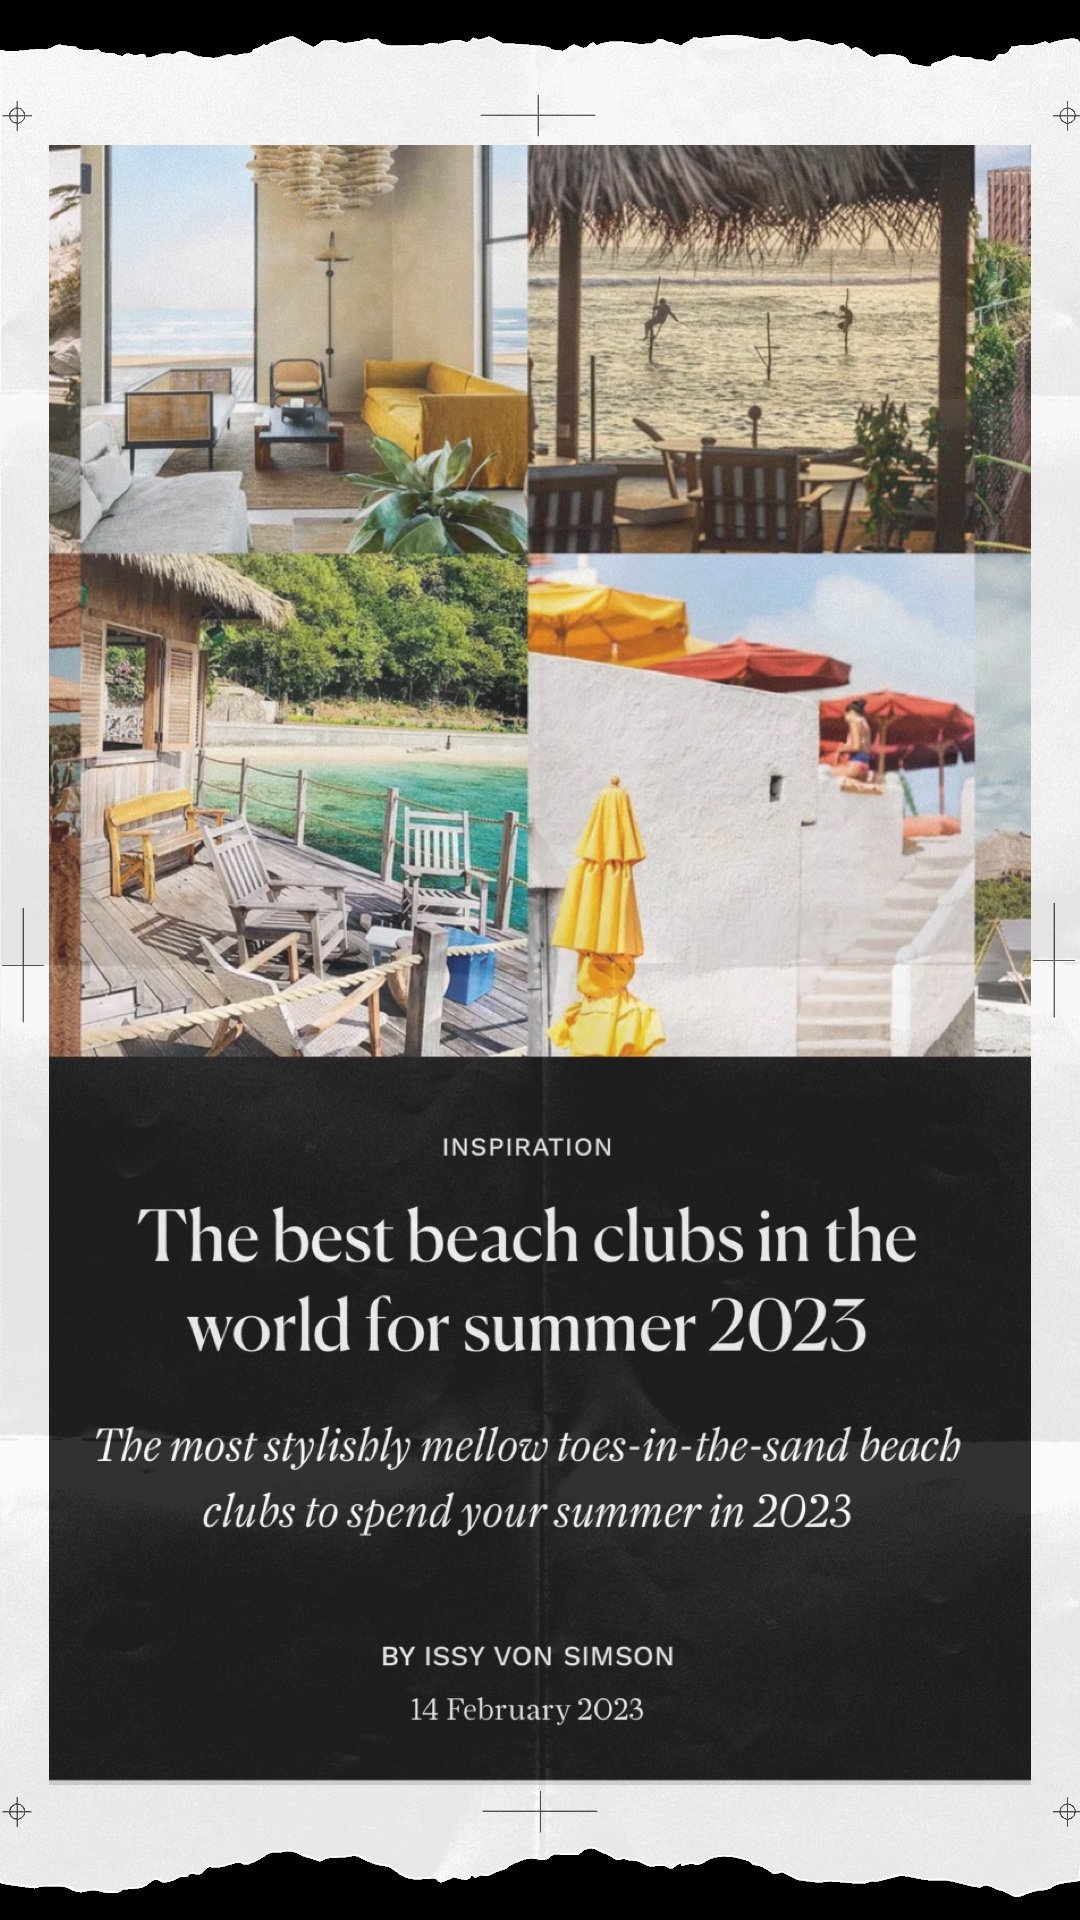 The best beach clubs in the world summer 2023